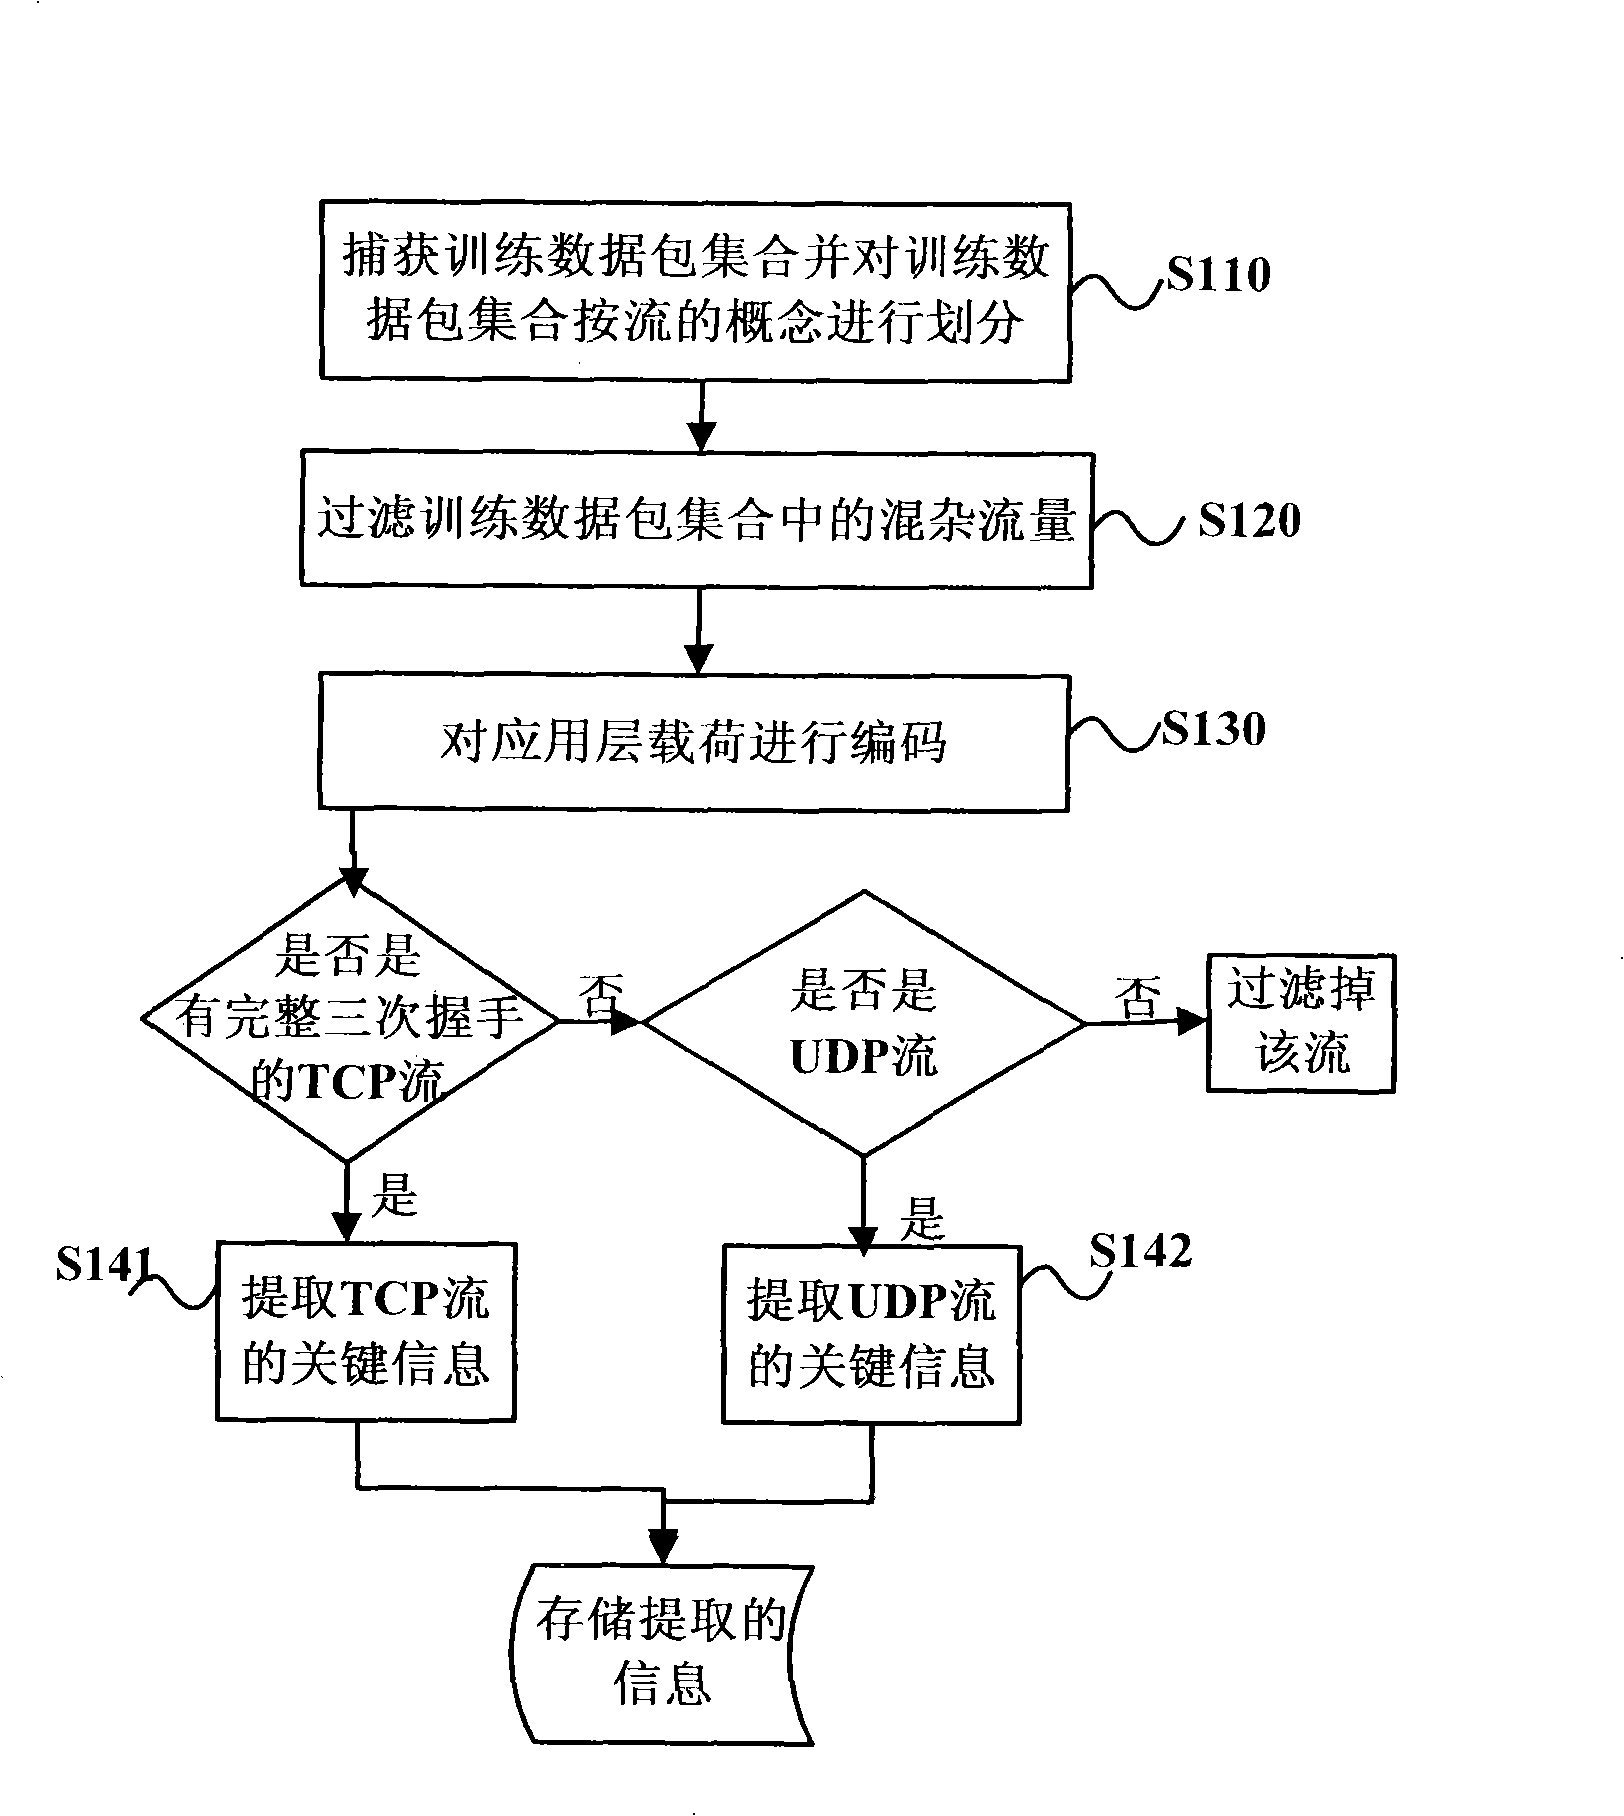 Method for digging recognition characteristic of application layer protocol